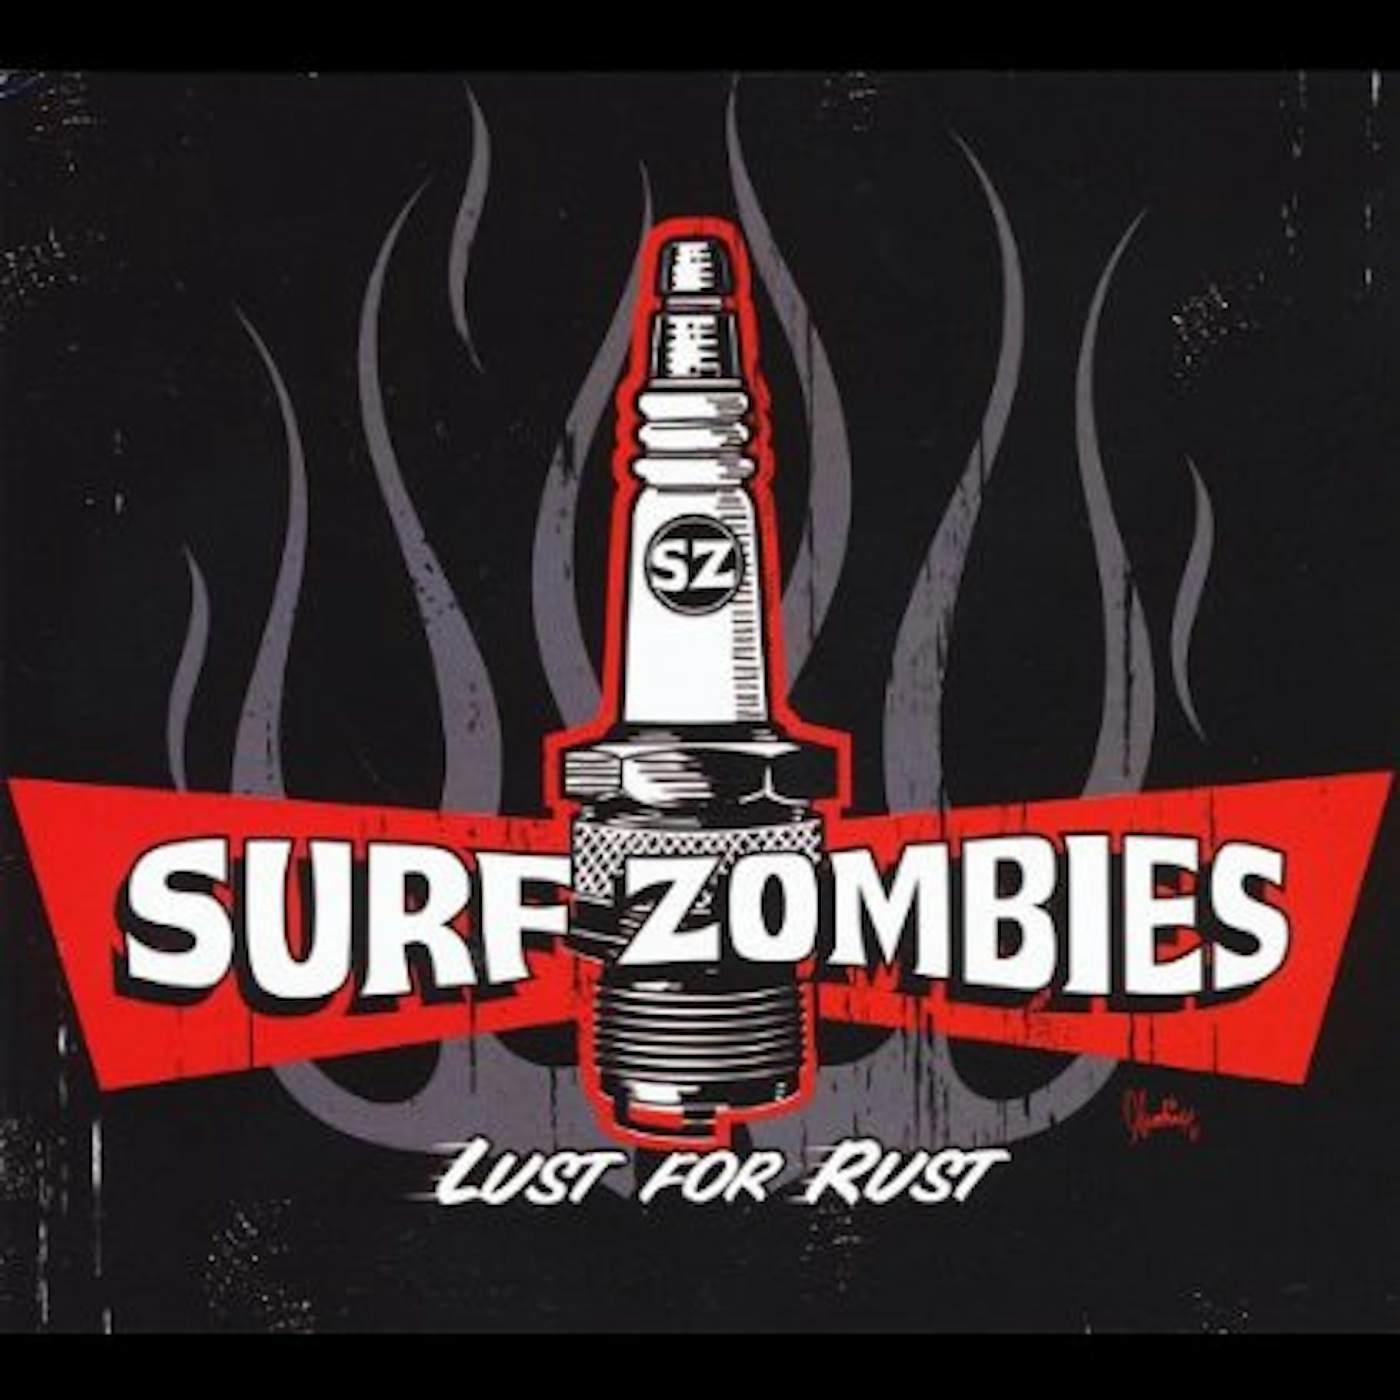 The Surf Zombies LUST FOR RUST CD